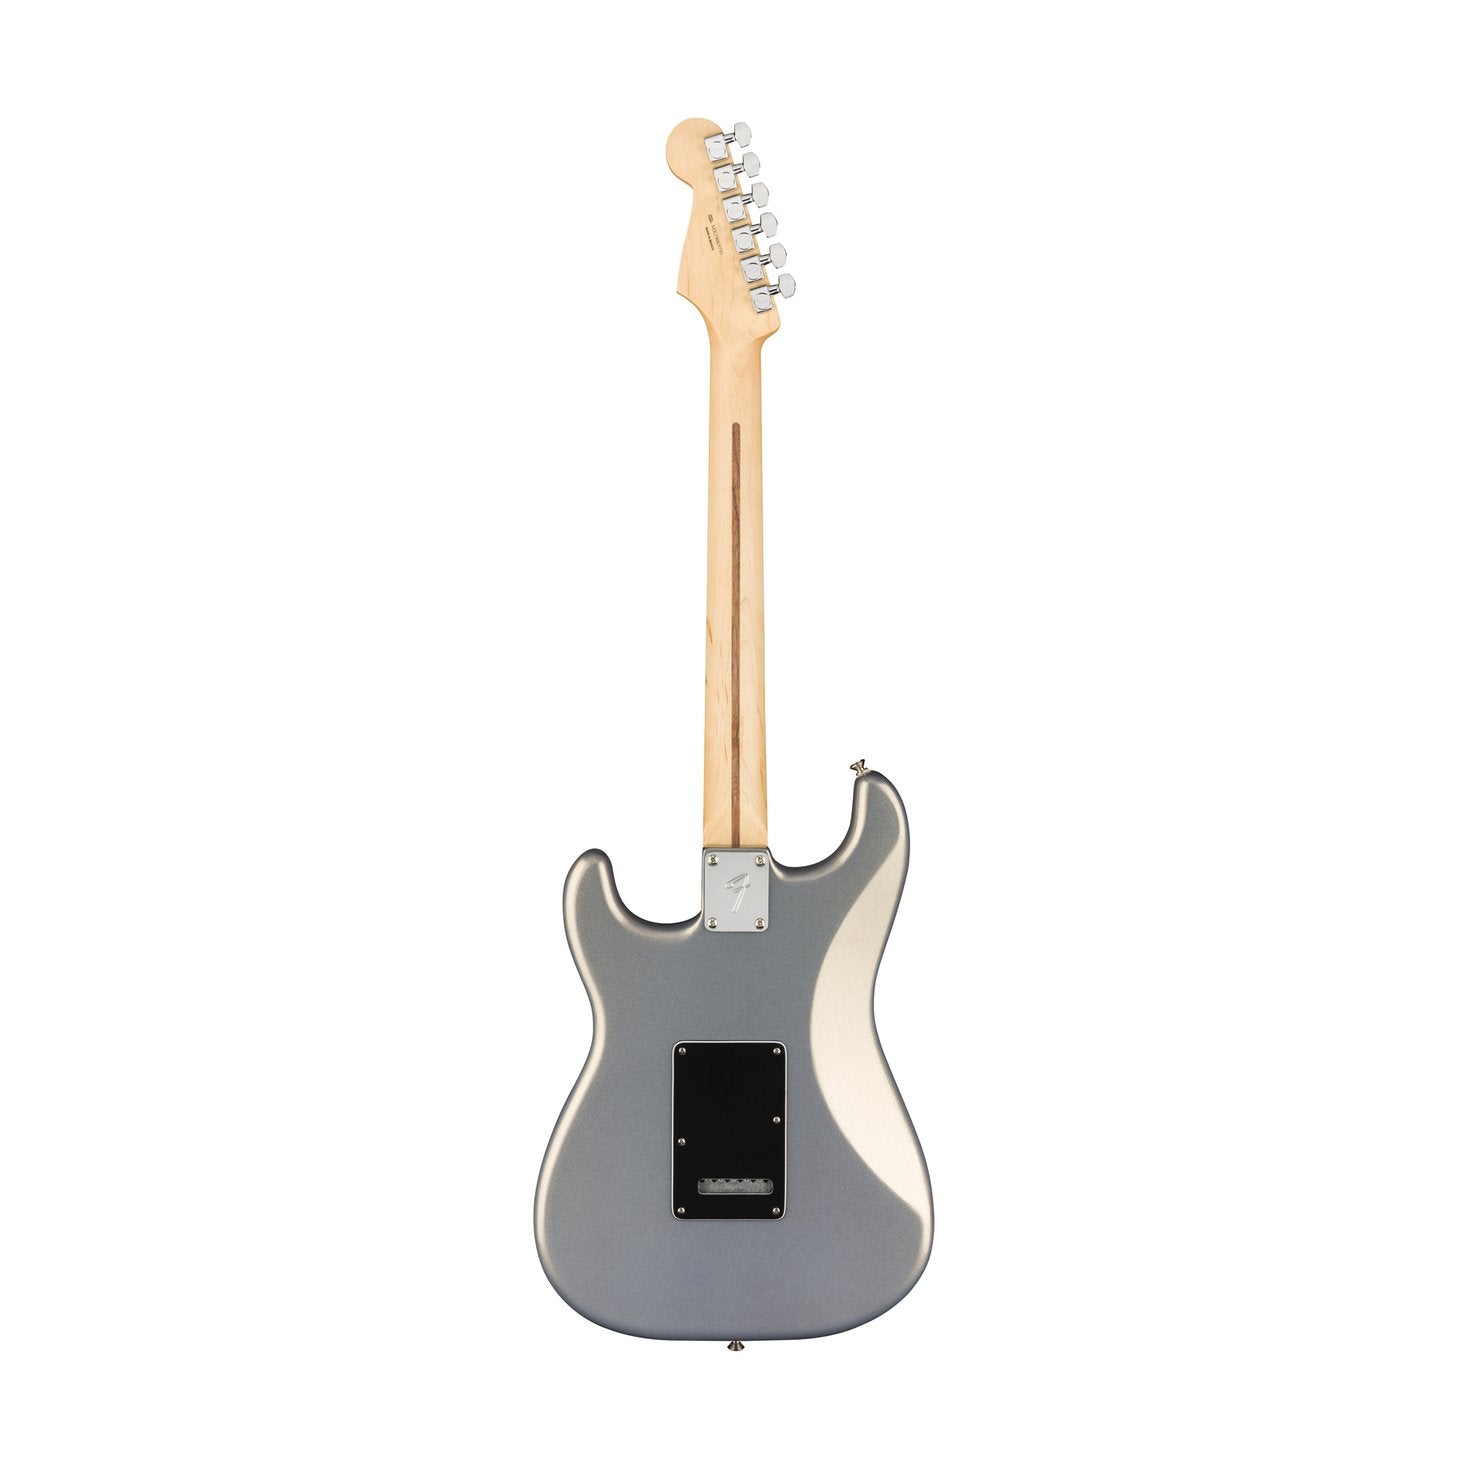 Fender Player HSH Stratocaster Electric Guitar, Pau Ferro FB, Silver, FENDER, ELECTRIC GUITAR, fender-eletric-guitar-f03-014-4533-581, ZOSO MUSIC SDN BHD